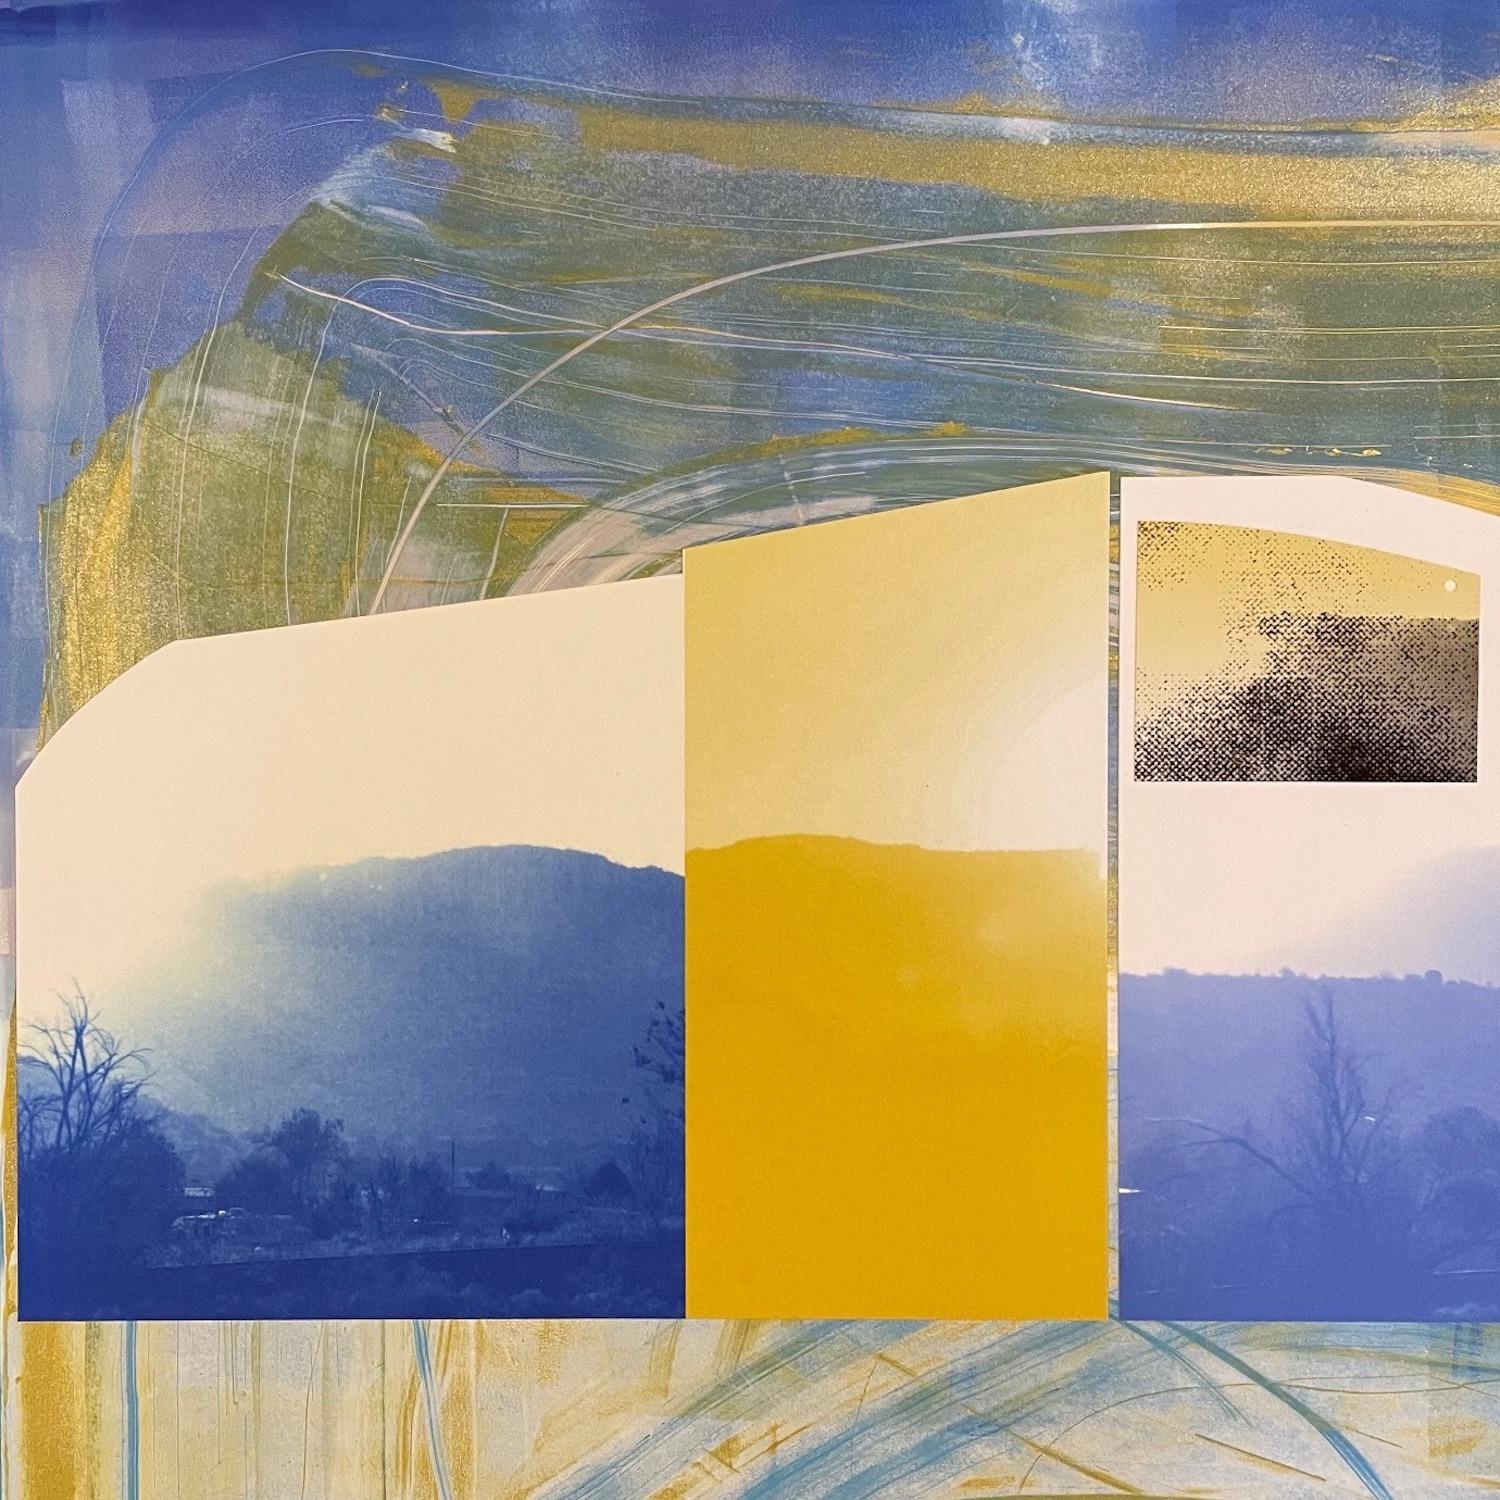 Patty deGrandpre’s “The Long Part of the Drive” is a predominately blue, yellow, and gold unique contemporary abstract landscape represented on a 16 x 20 x 2 inch “Ampersand Claybord” block embracing creative photography, mixed media, and collage.